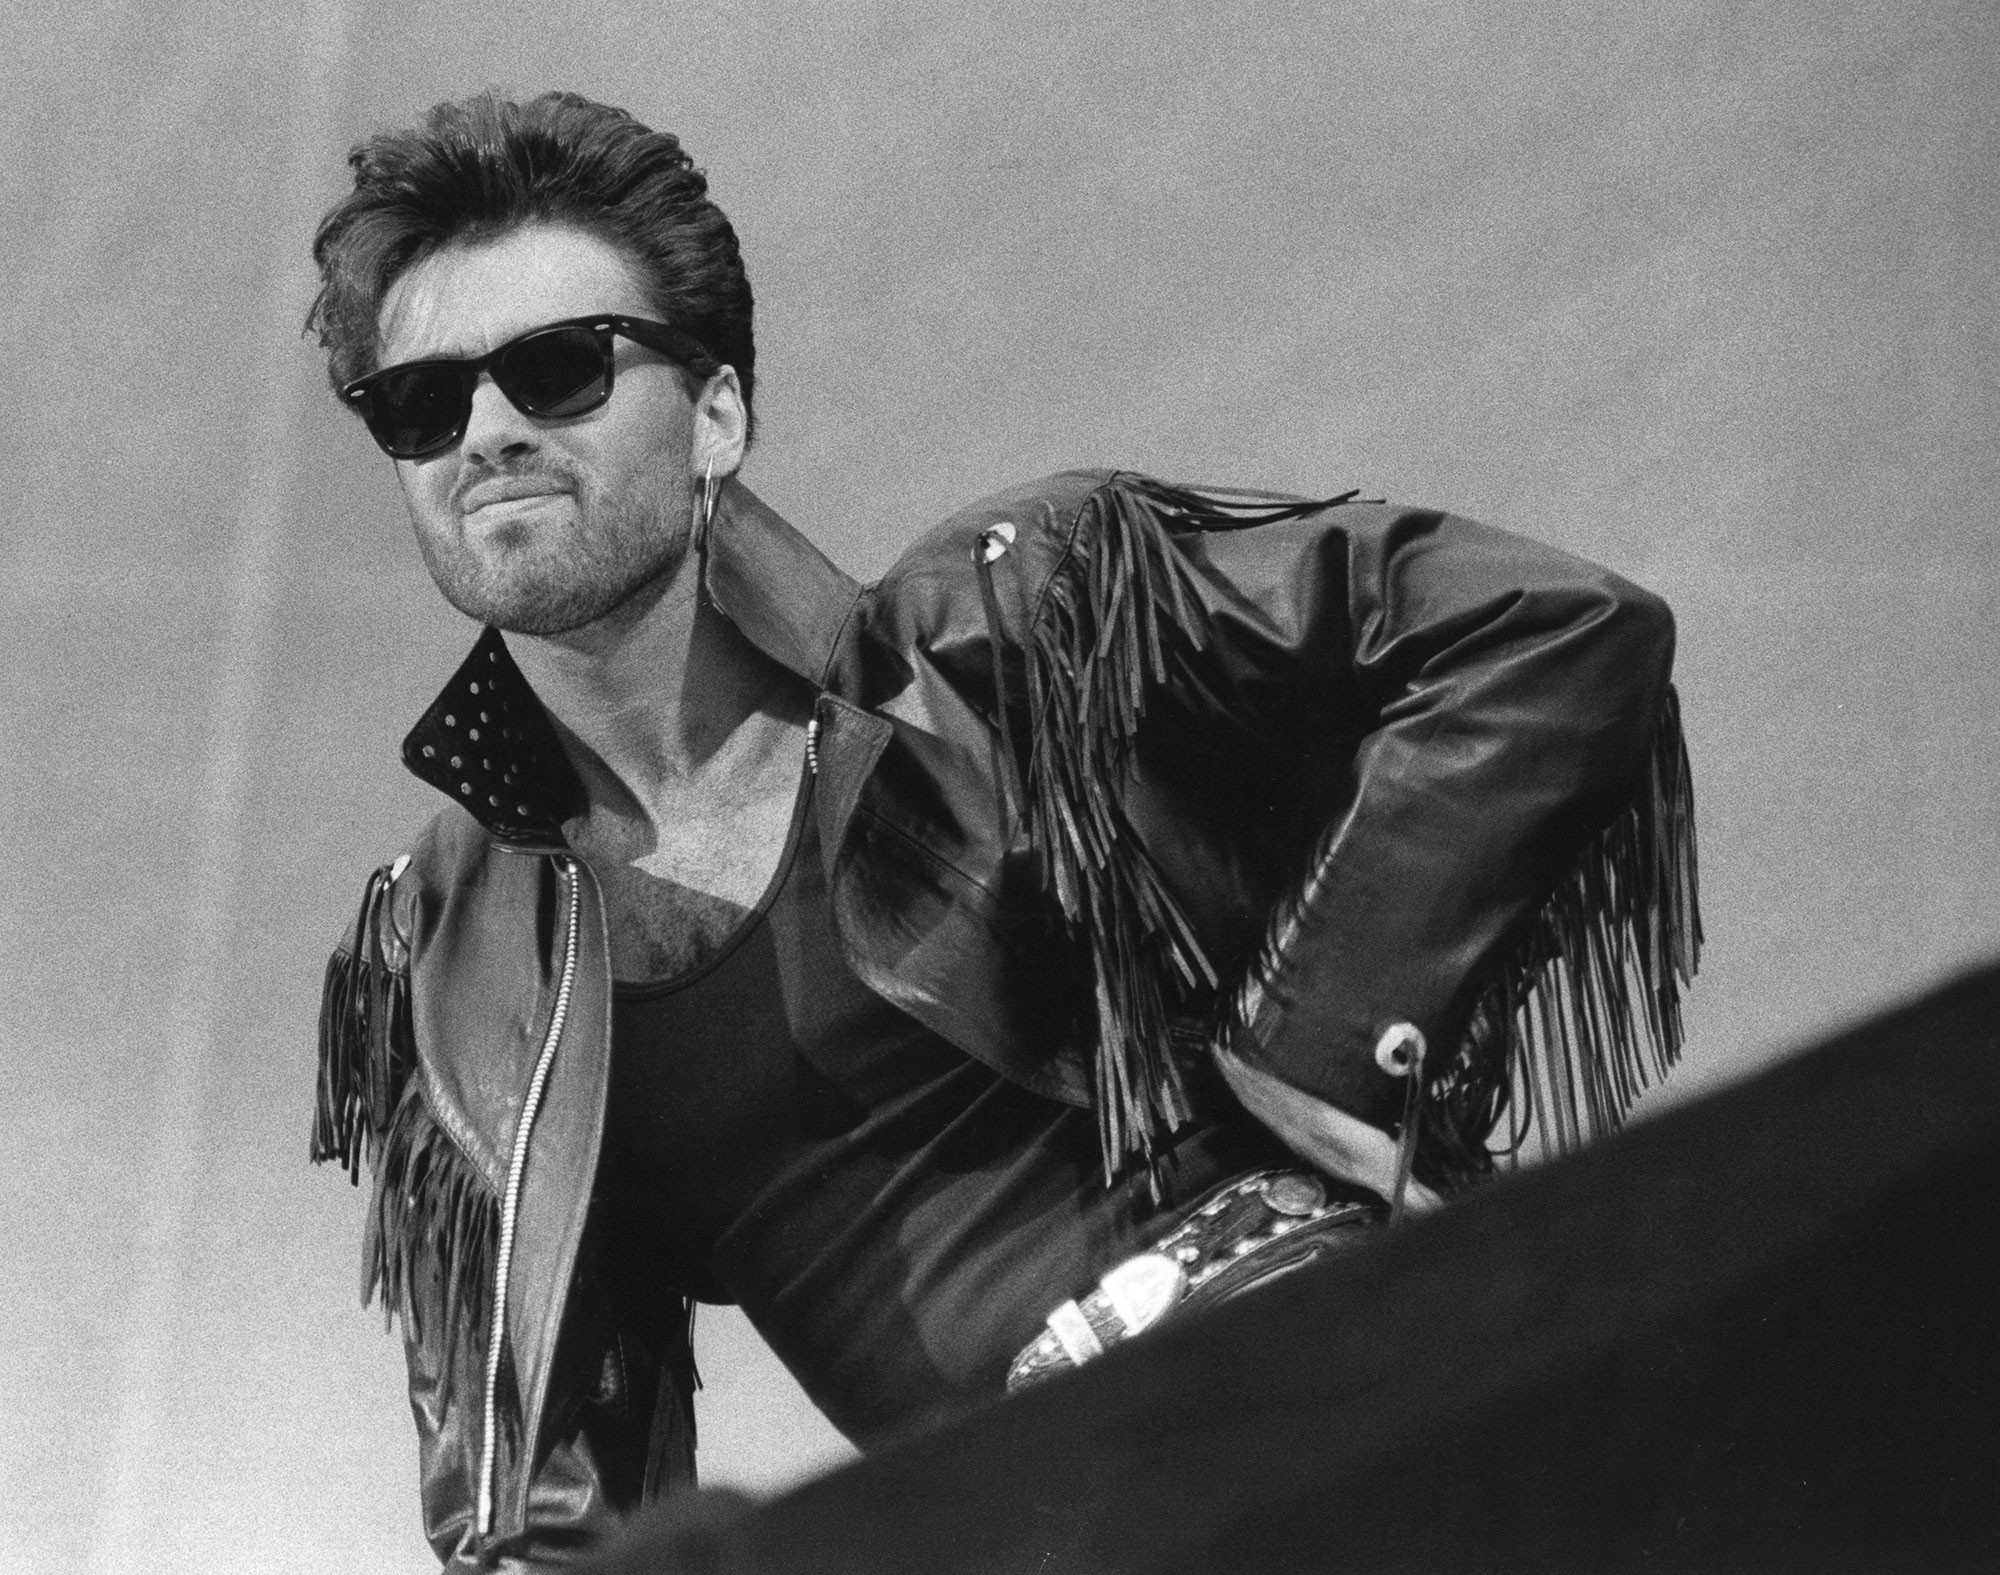 George Michael: Performed with Queen at The Freddie Mercury Tribute Concert on 20 April 1992 at Wembley Stadium, Black and white. 2000x1580 HD Wallpaper.